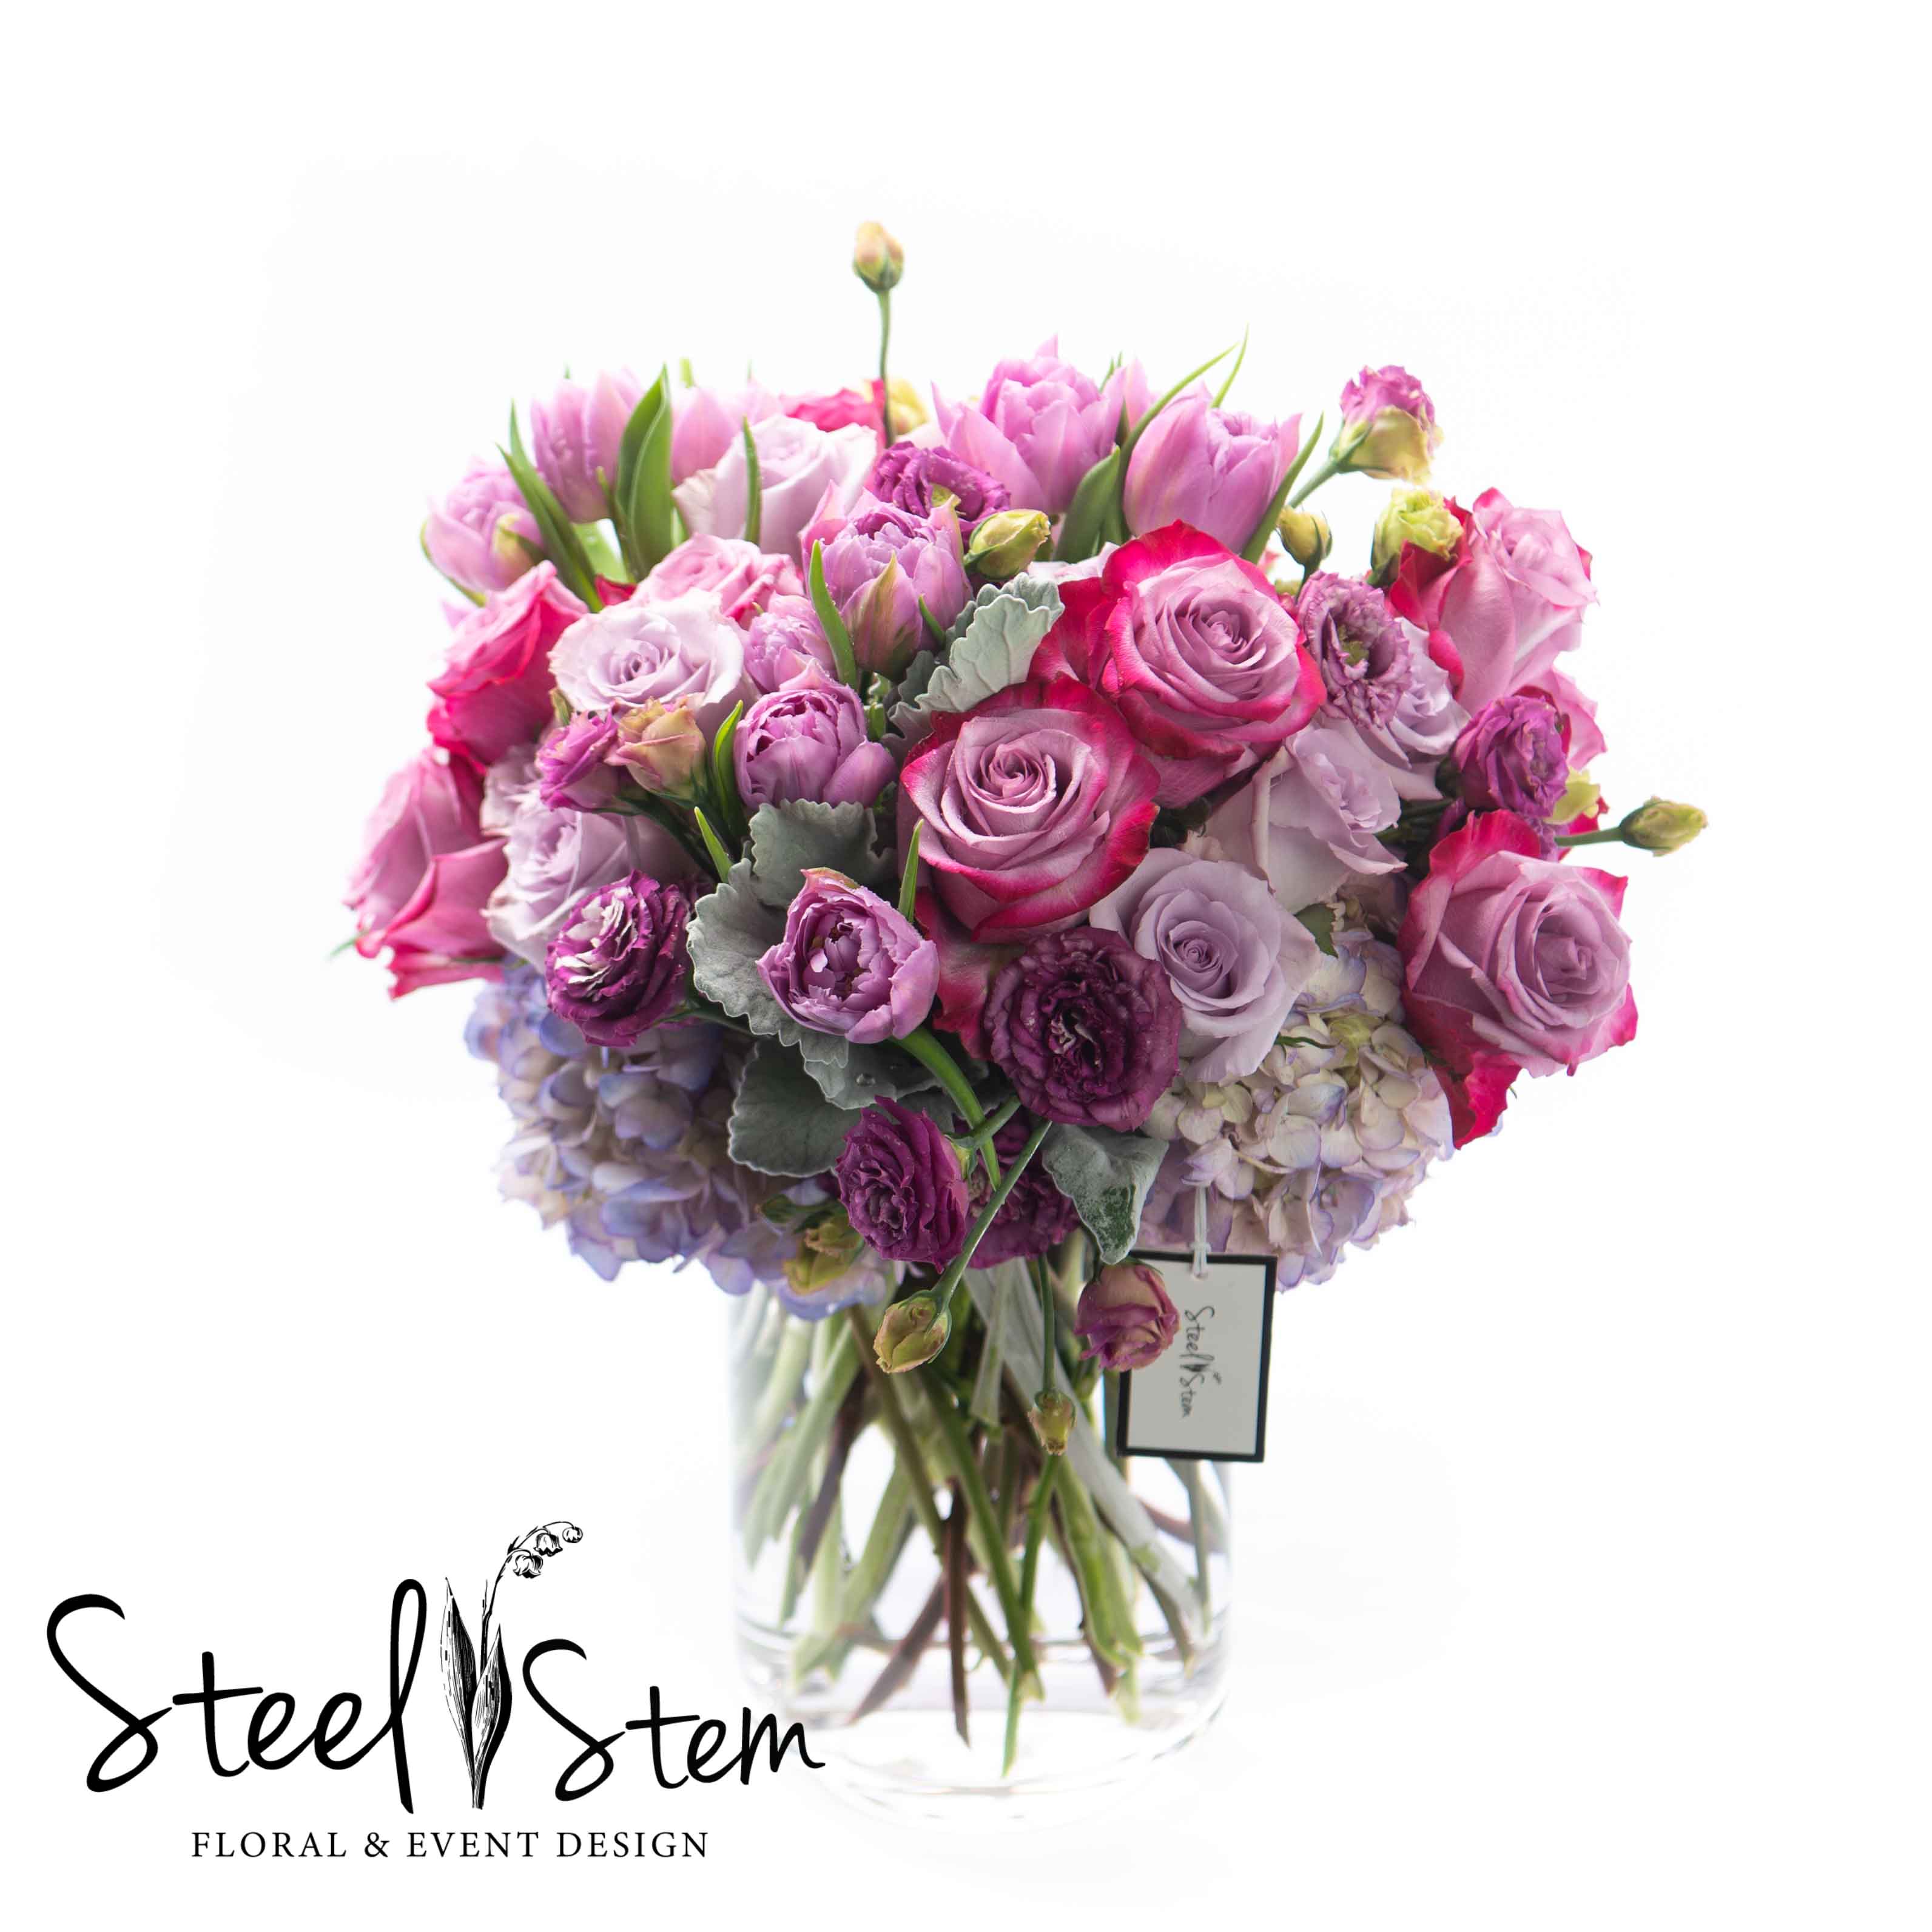 Lovely Lavender - A collection of lovely shades of soft lavender roses, whimsical blooms of lisianthus, soft purple tulips, and pops of light lavender hydrangeas with accents of dusty miller that's designed inside of a classic tall glass clear cylinder.